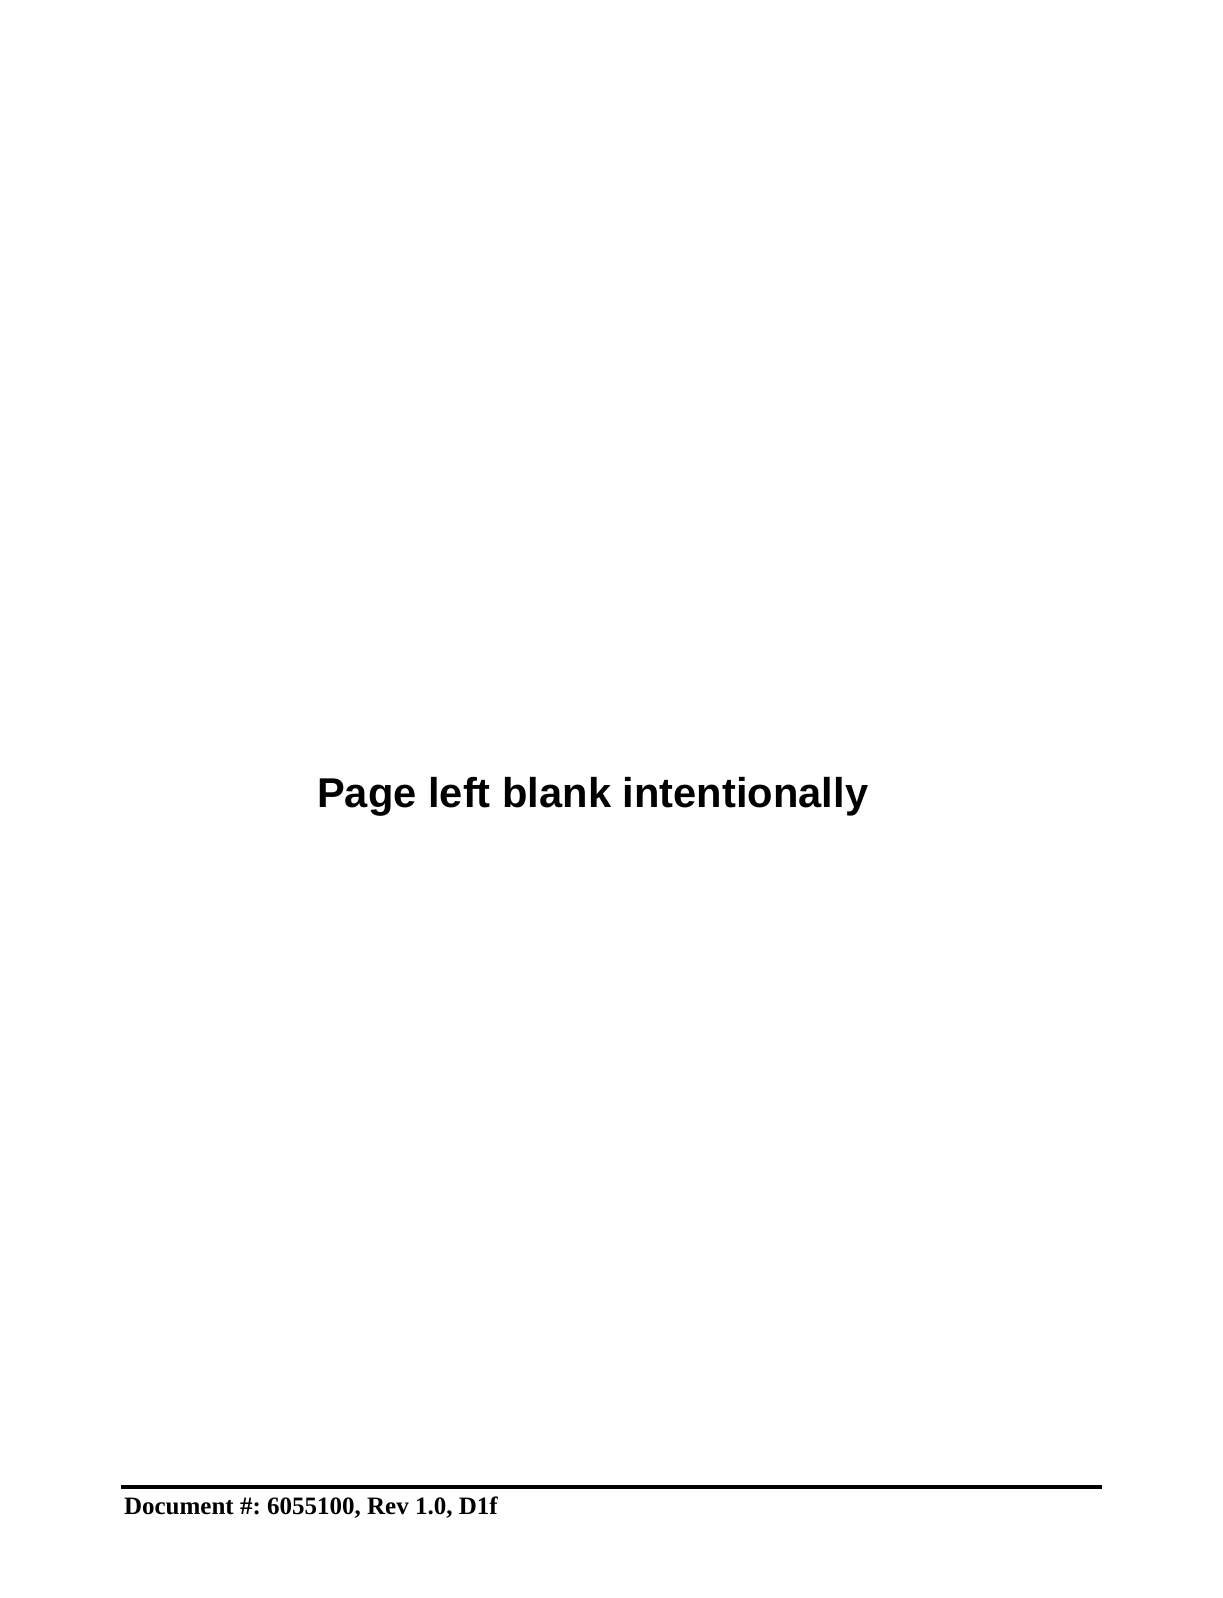 Document #: 6055100, Rev 1.0, D1f                                                Page left blank intentionally 